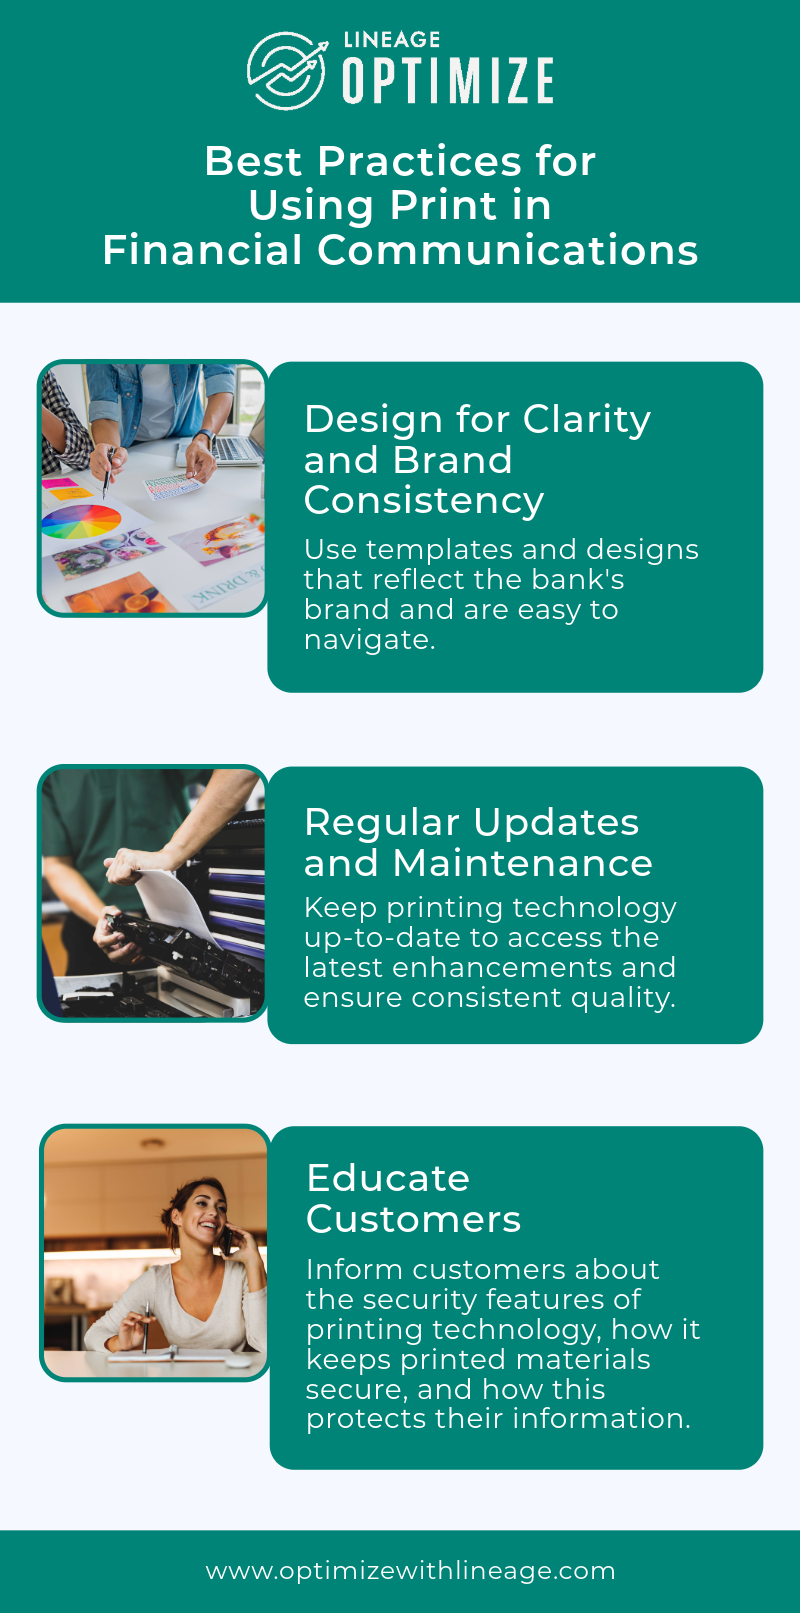 Best Practices for Using Advanced Printing in Financial Communications infographic